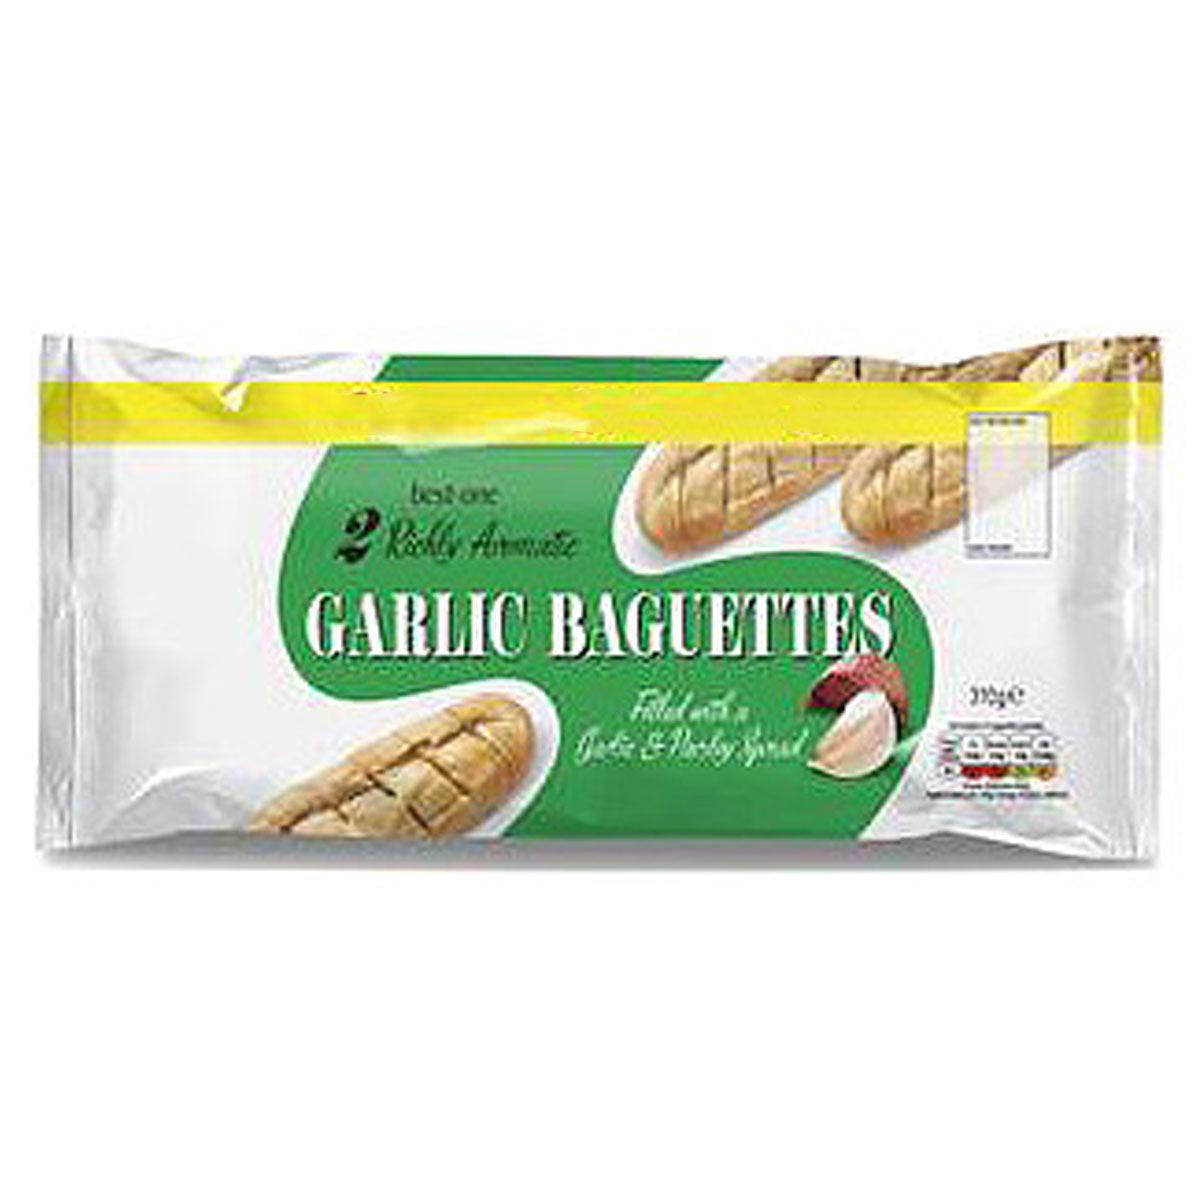 A package of Best One - Garlic Baguettes - 310g on a white background.